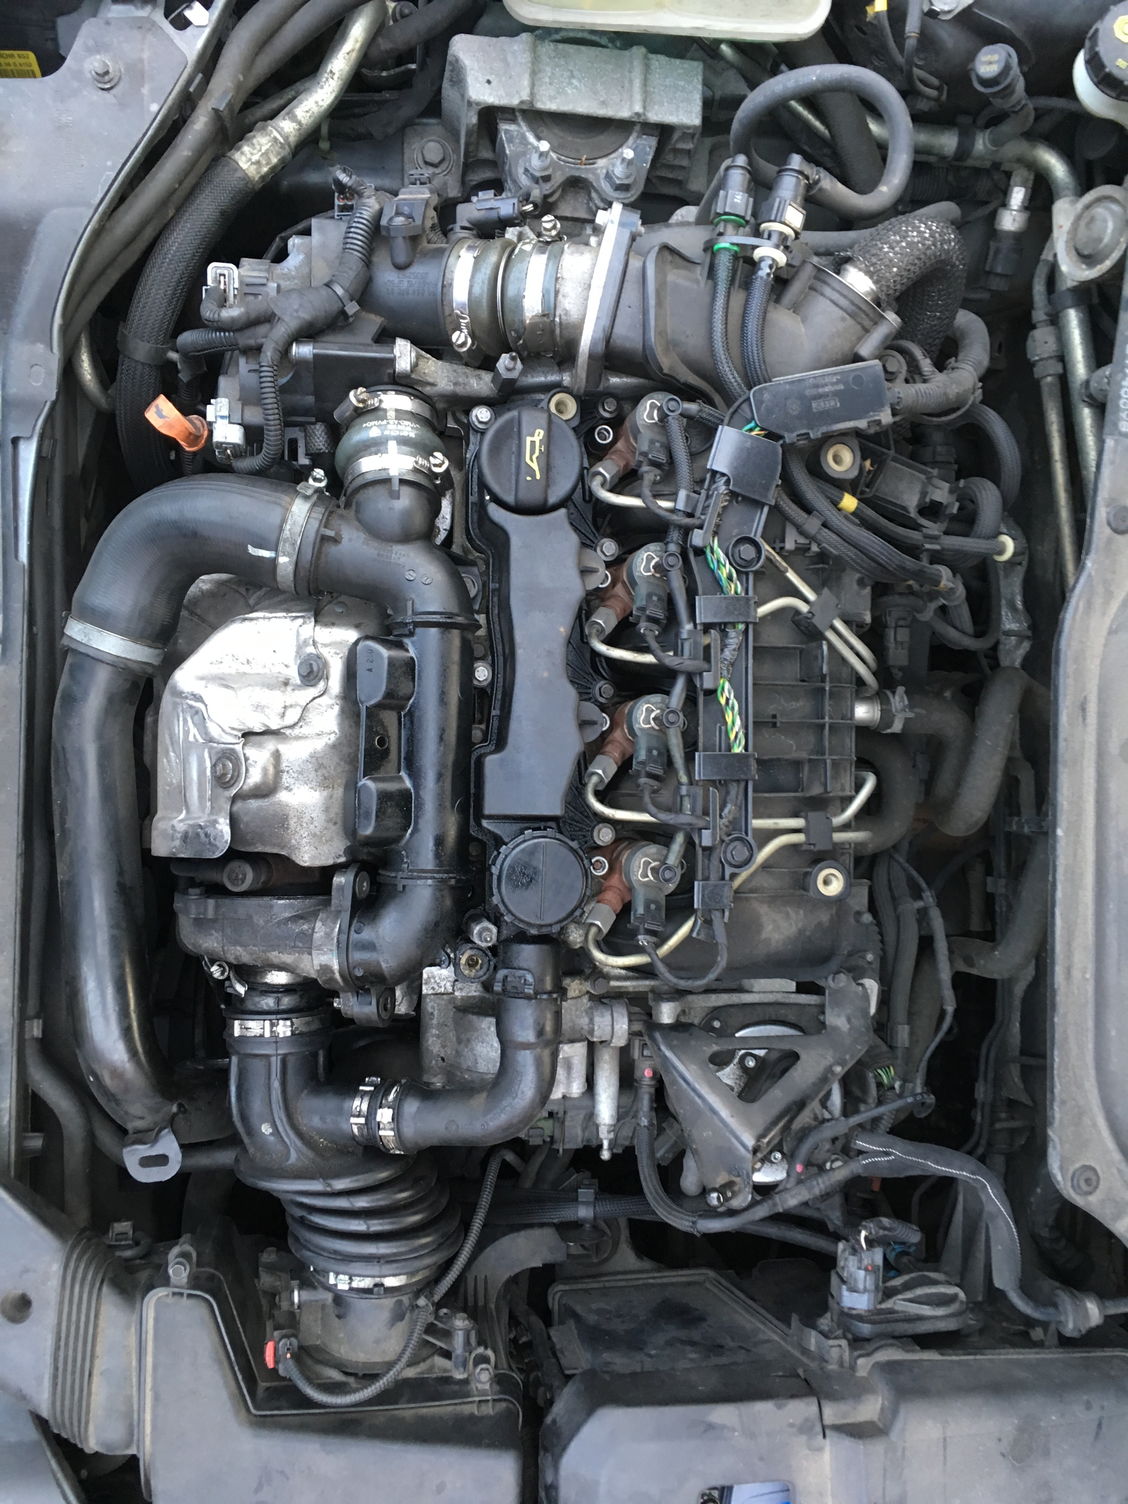 Where is my EGR valve? Volvo Forums Volvo Enthusiasts